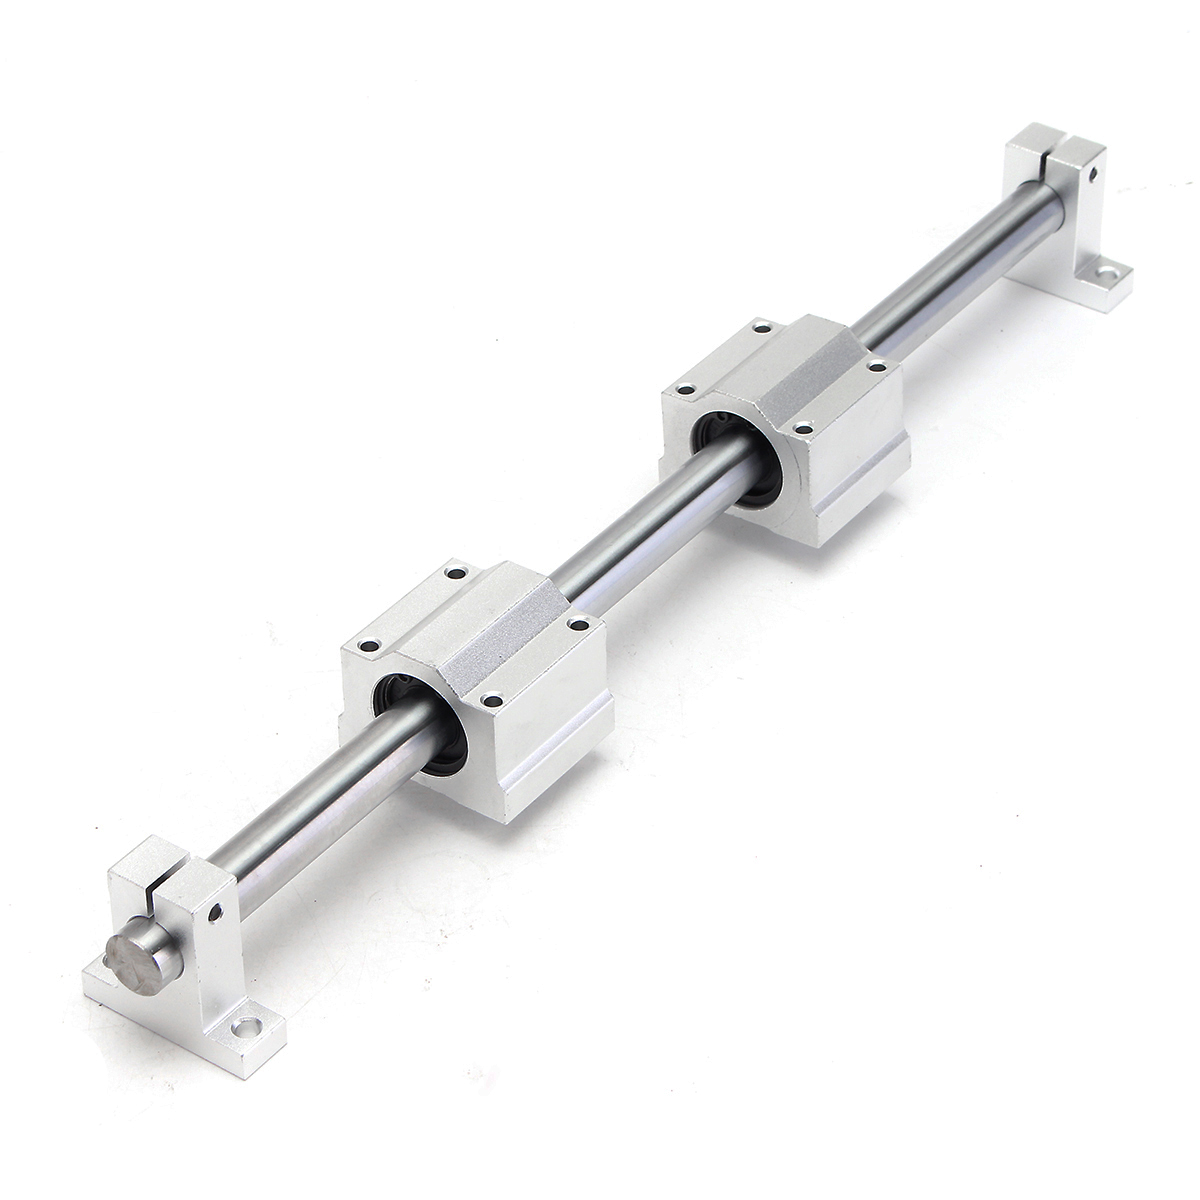 Machifit-16mm-x-1000mm-Linear-Rail-Shaft-With-Bearing-Block-and-Guide-Support-For-CNC-Parts-1390357-3